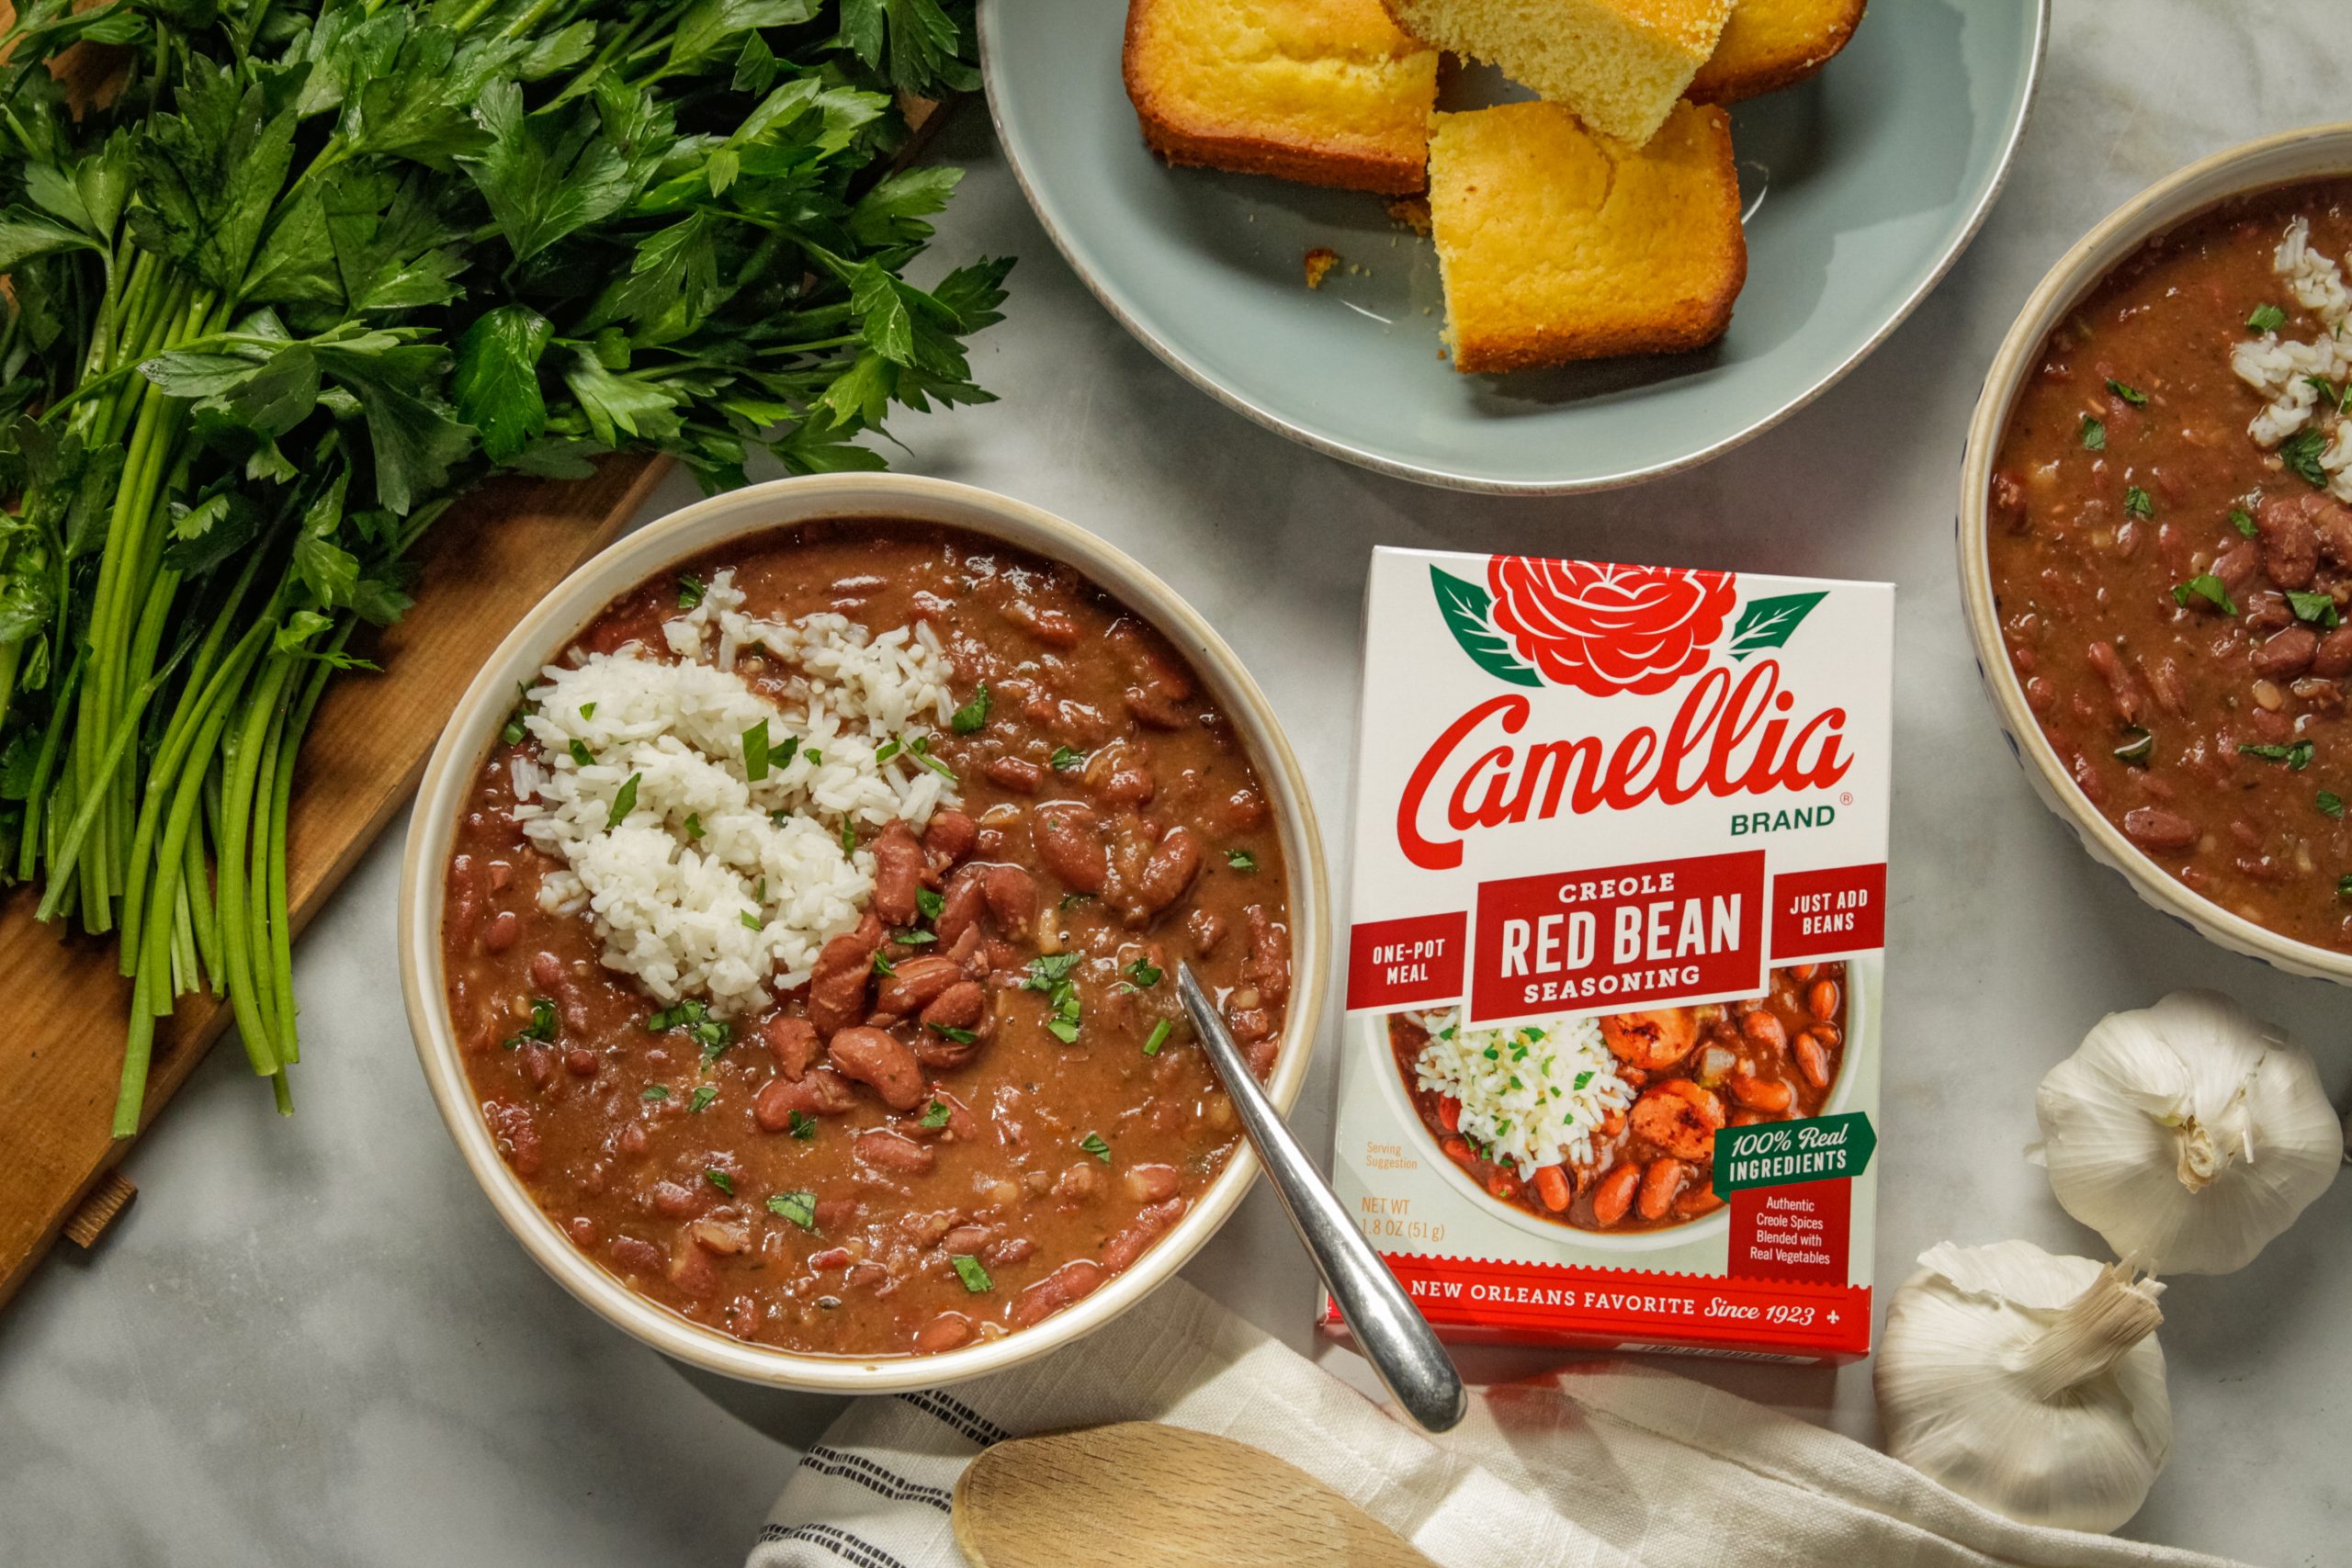 https://www.camelliabrand.com/static/wp-content/uploads/2016/04/IMG_0931_Red-Beans-overhead-two-servings-with-box-cornbread-no-sausage_cx_jc-1-scaled.jpg